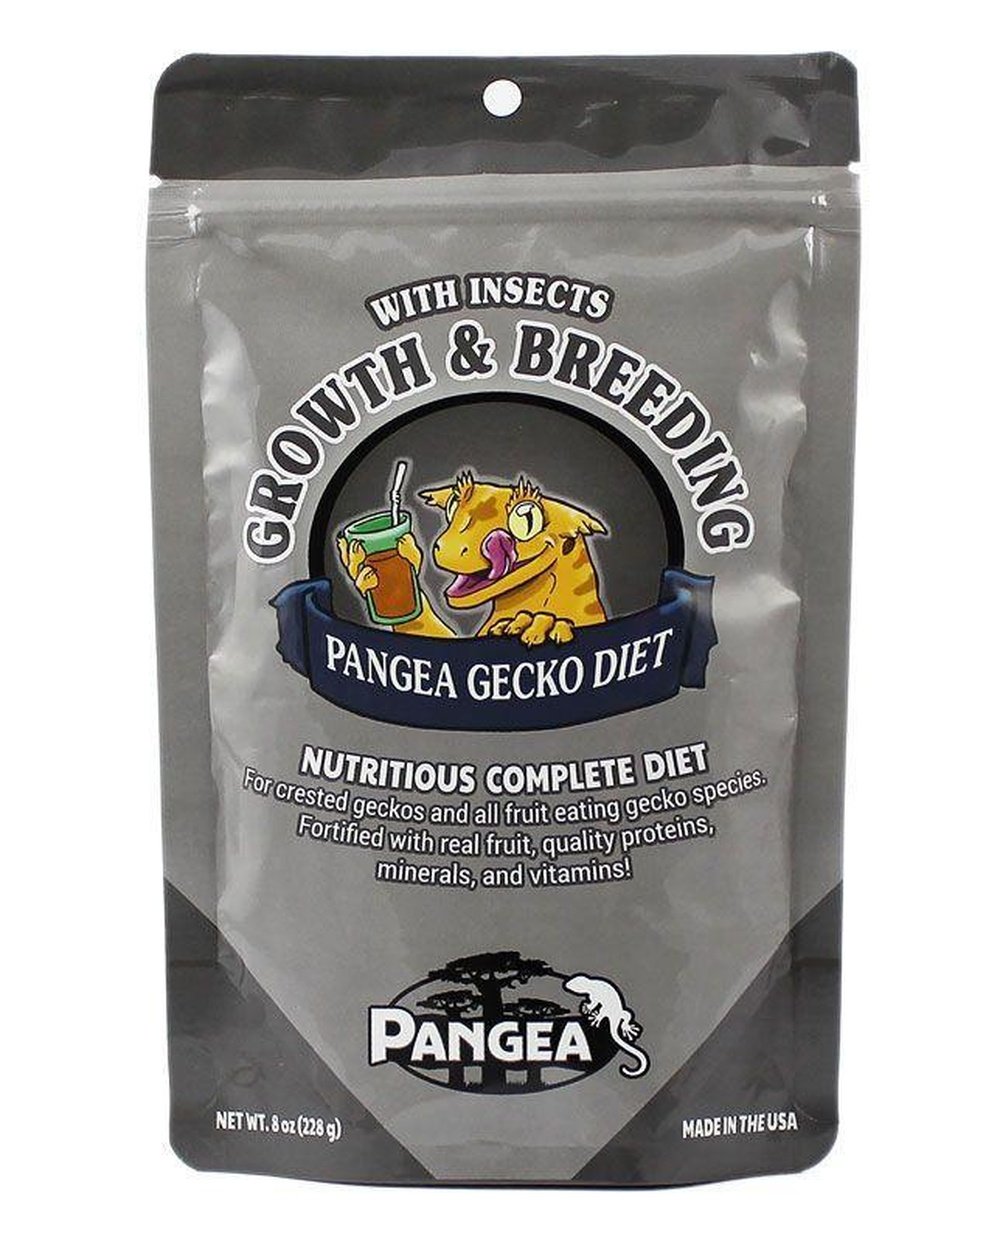 Pangea Growth & Breeding Complete Gecko Diet with Insects - Gray